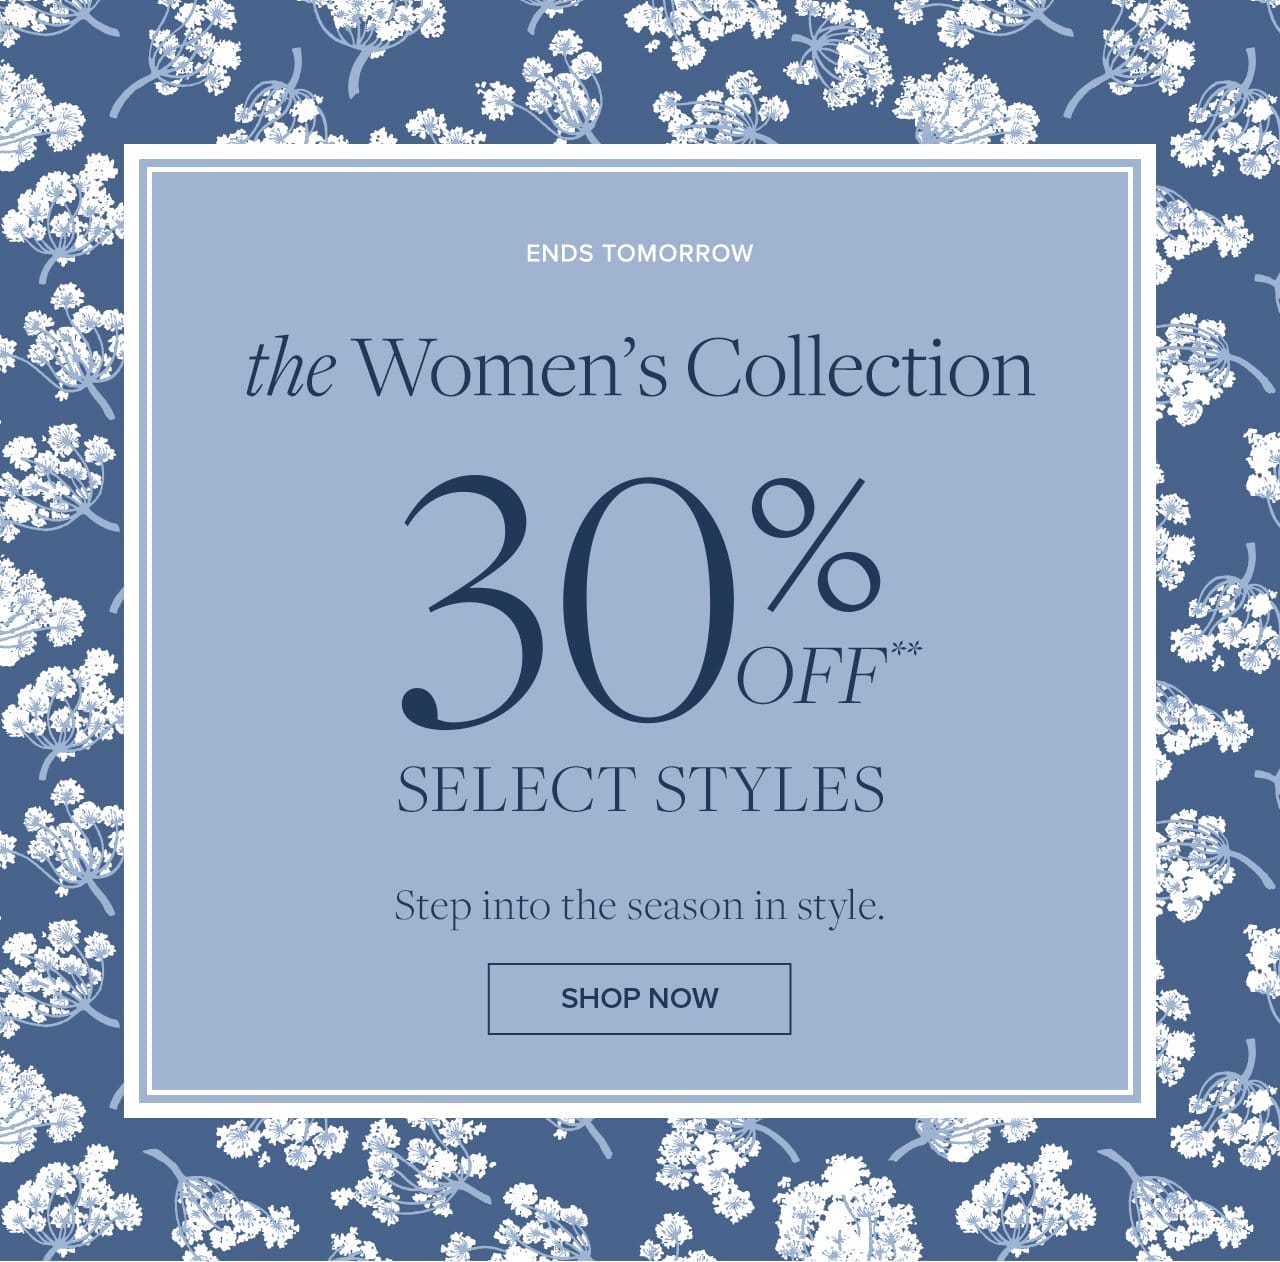 Ends Tomorrow .the Women's Collection 30% Off Select Styles. Step into the season in style. SHOP NOW